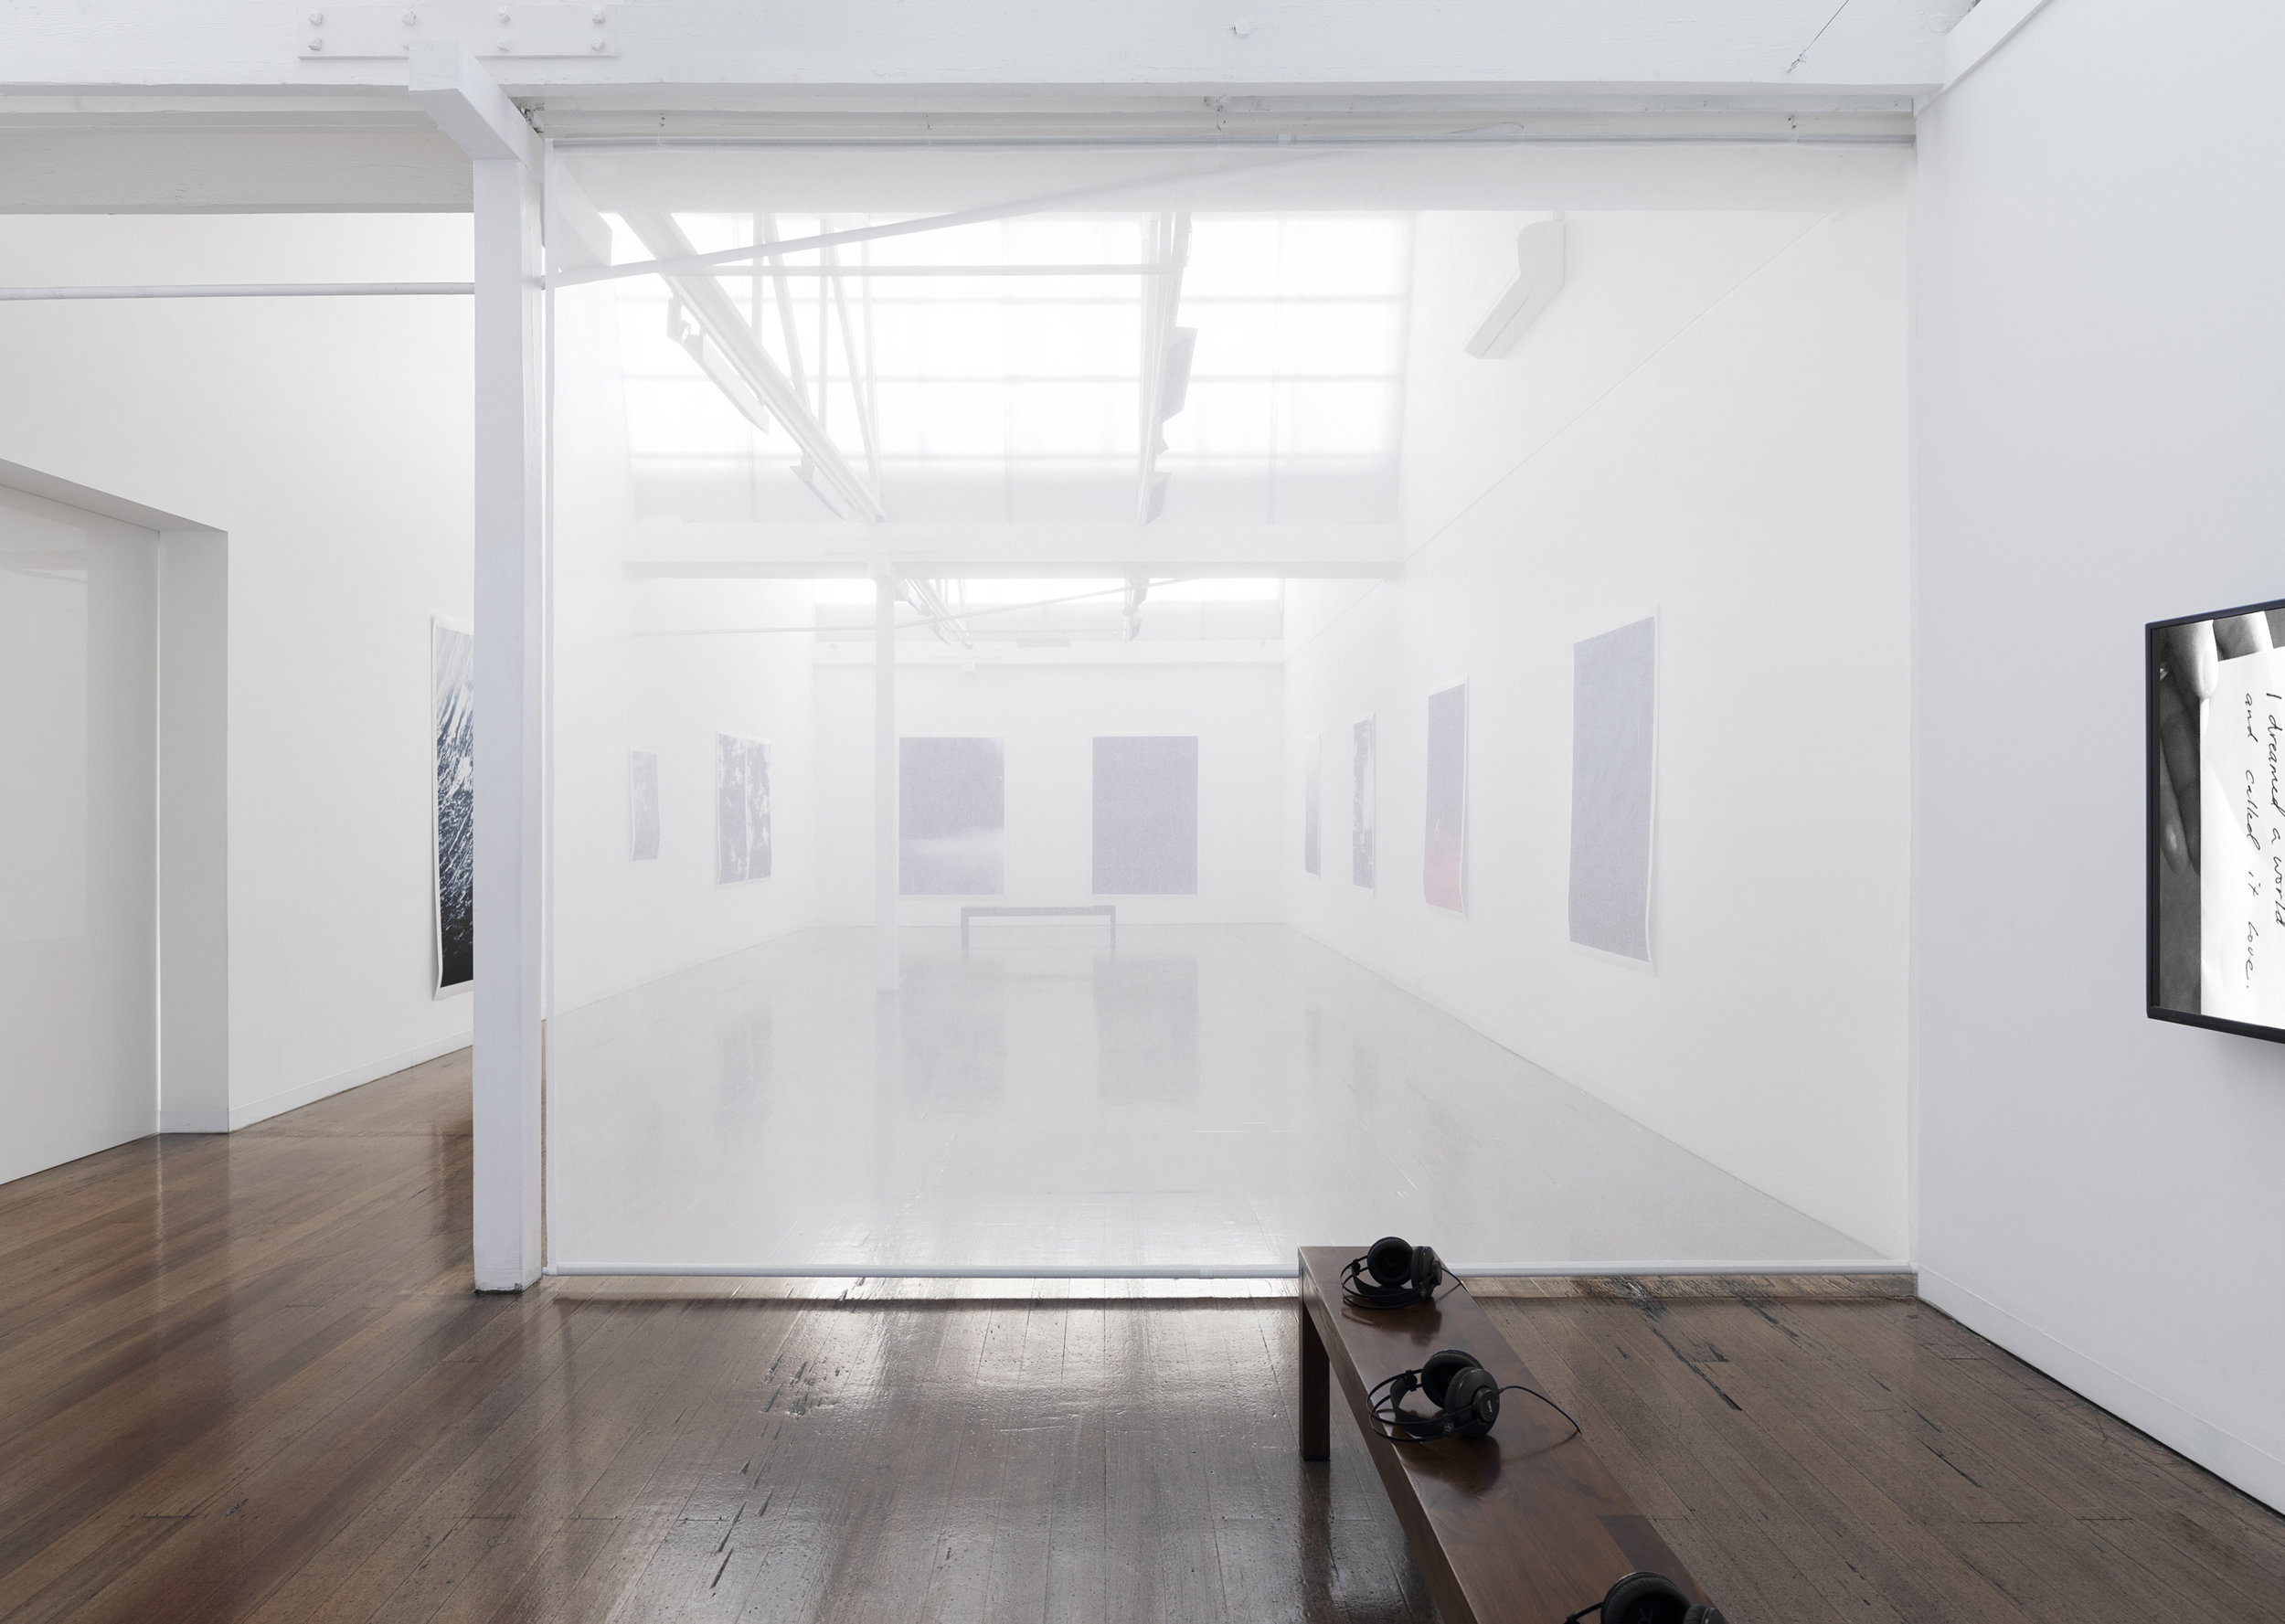  Installation view of “the sacredness of something” at Arc One Gallery, Melbourne (2019) 